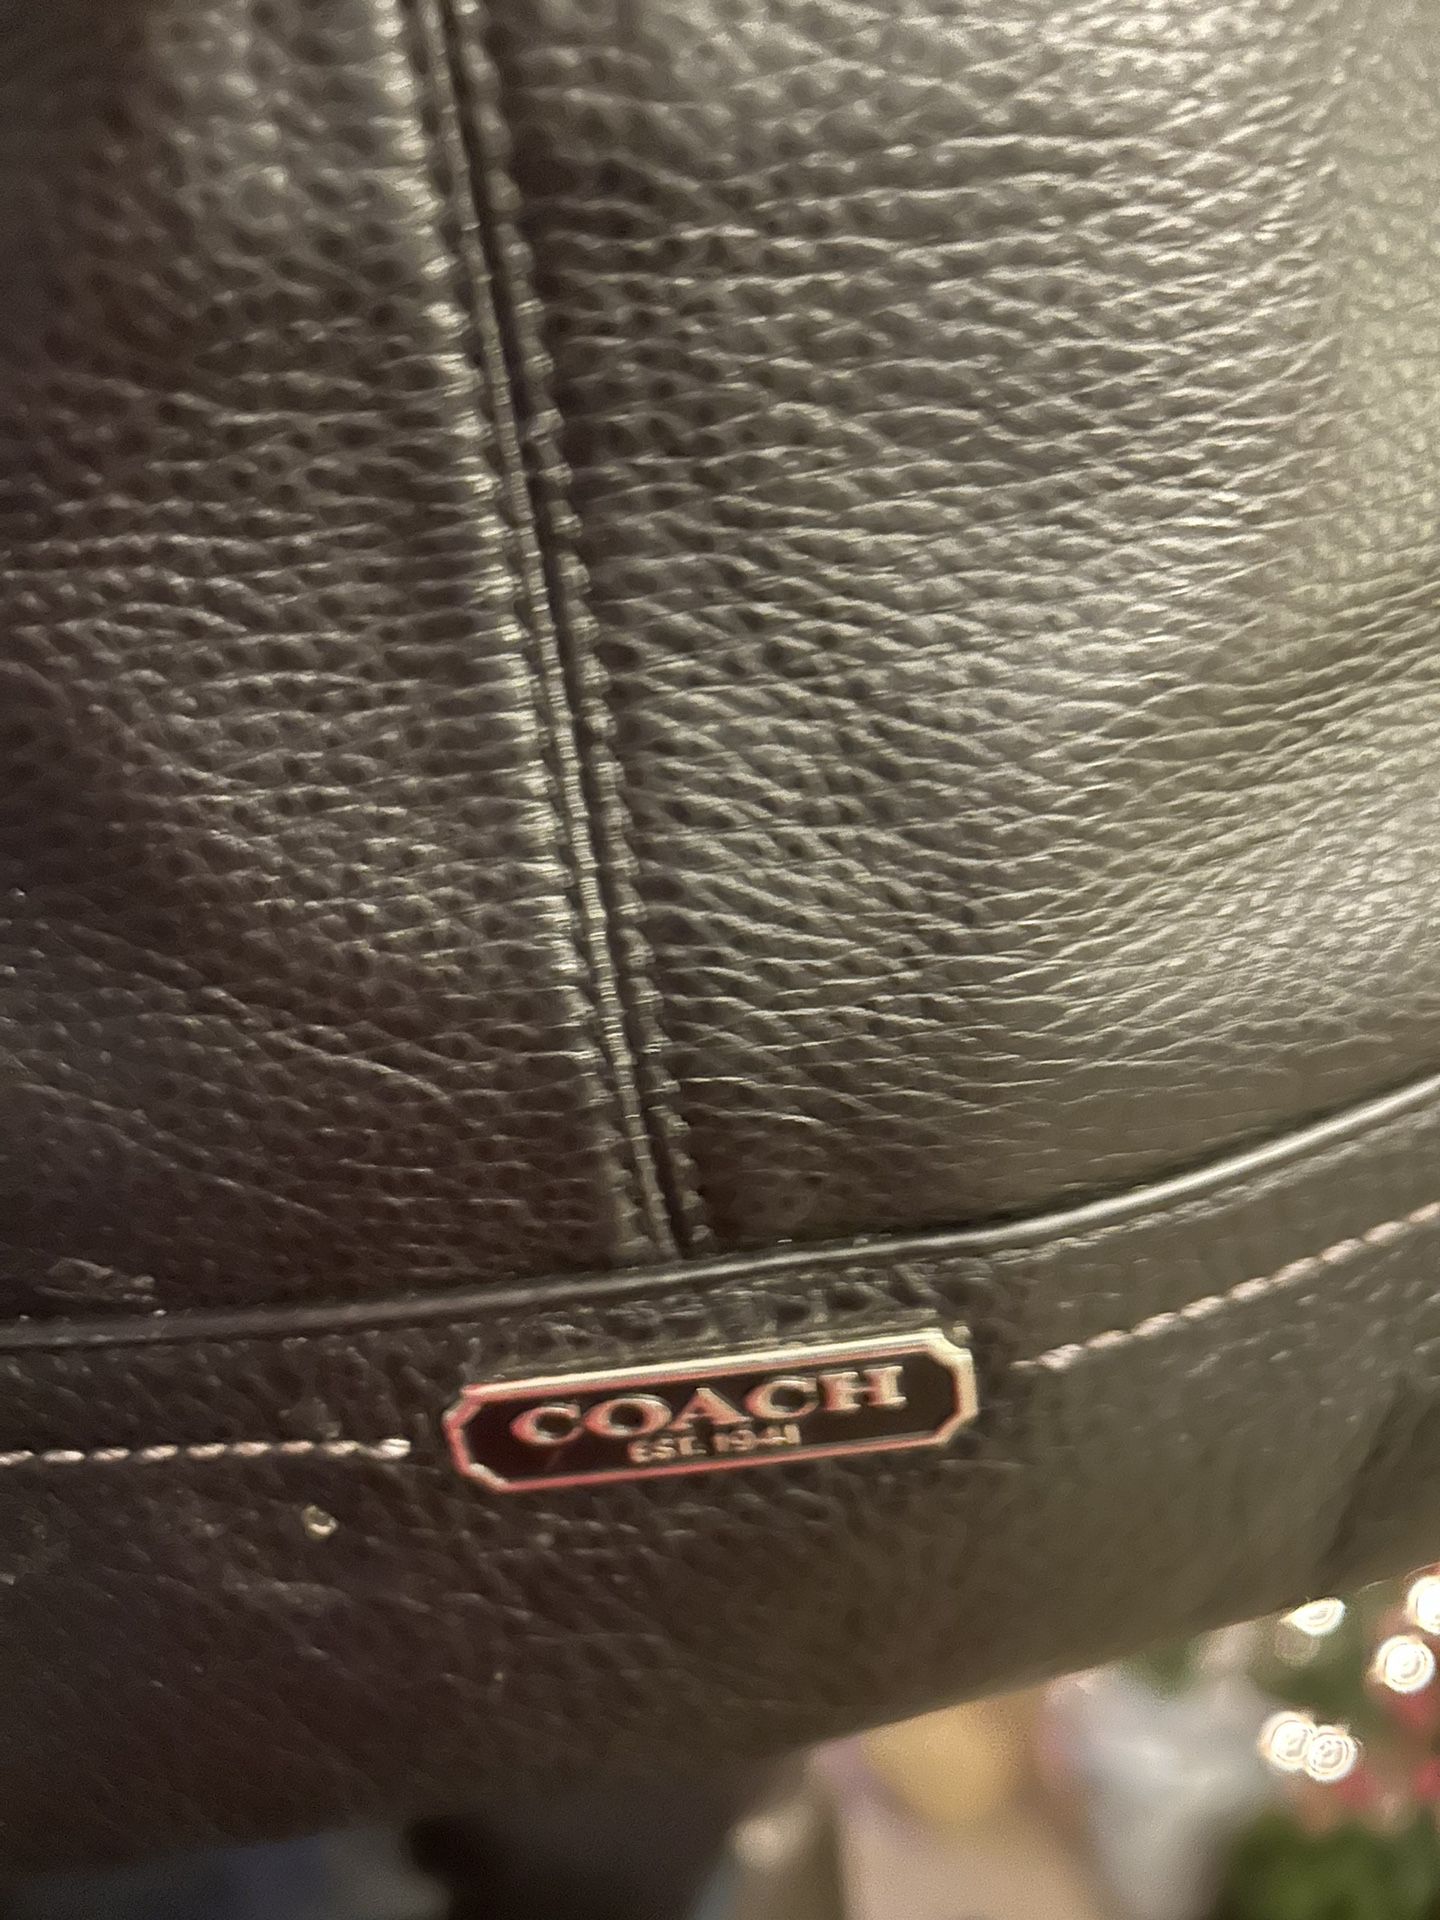 Large Coach Bag With Side Pockets